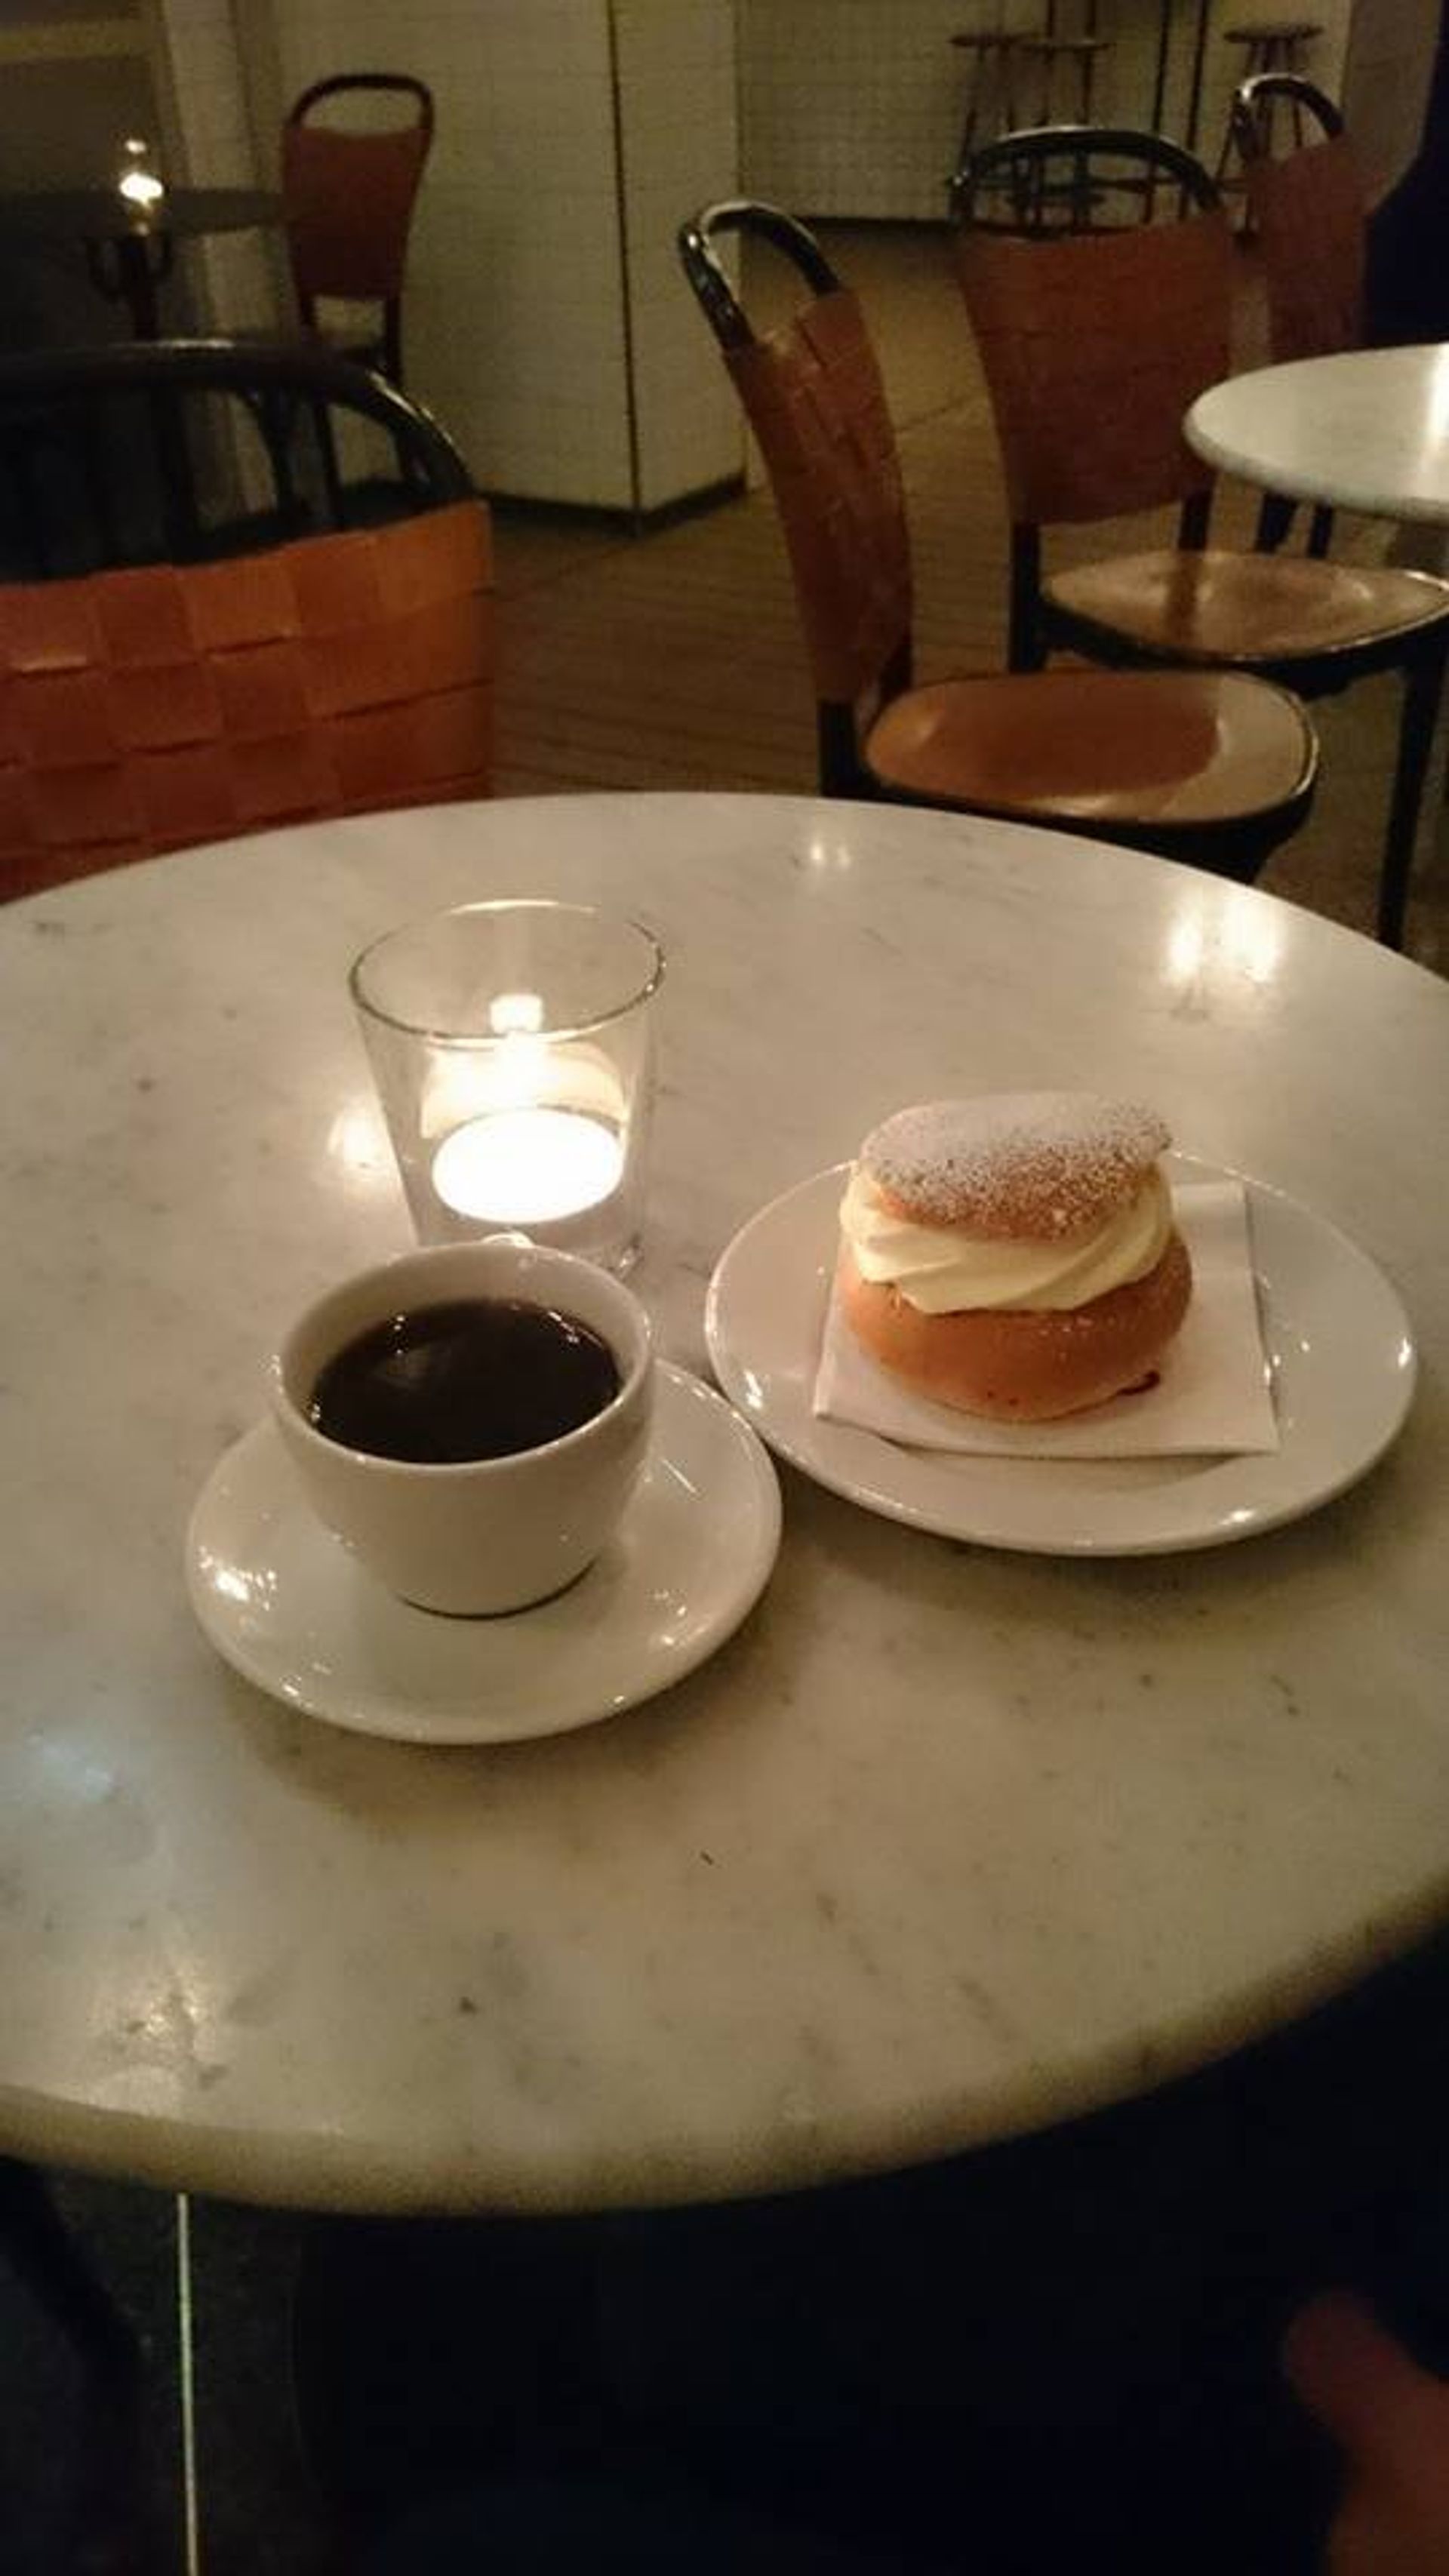 Semla and coffee- A match made in heaven.